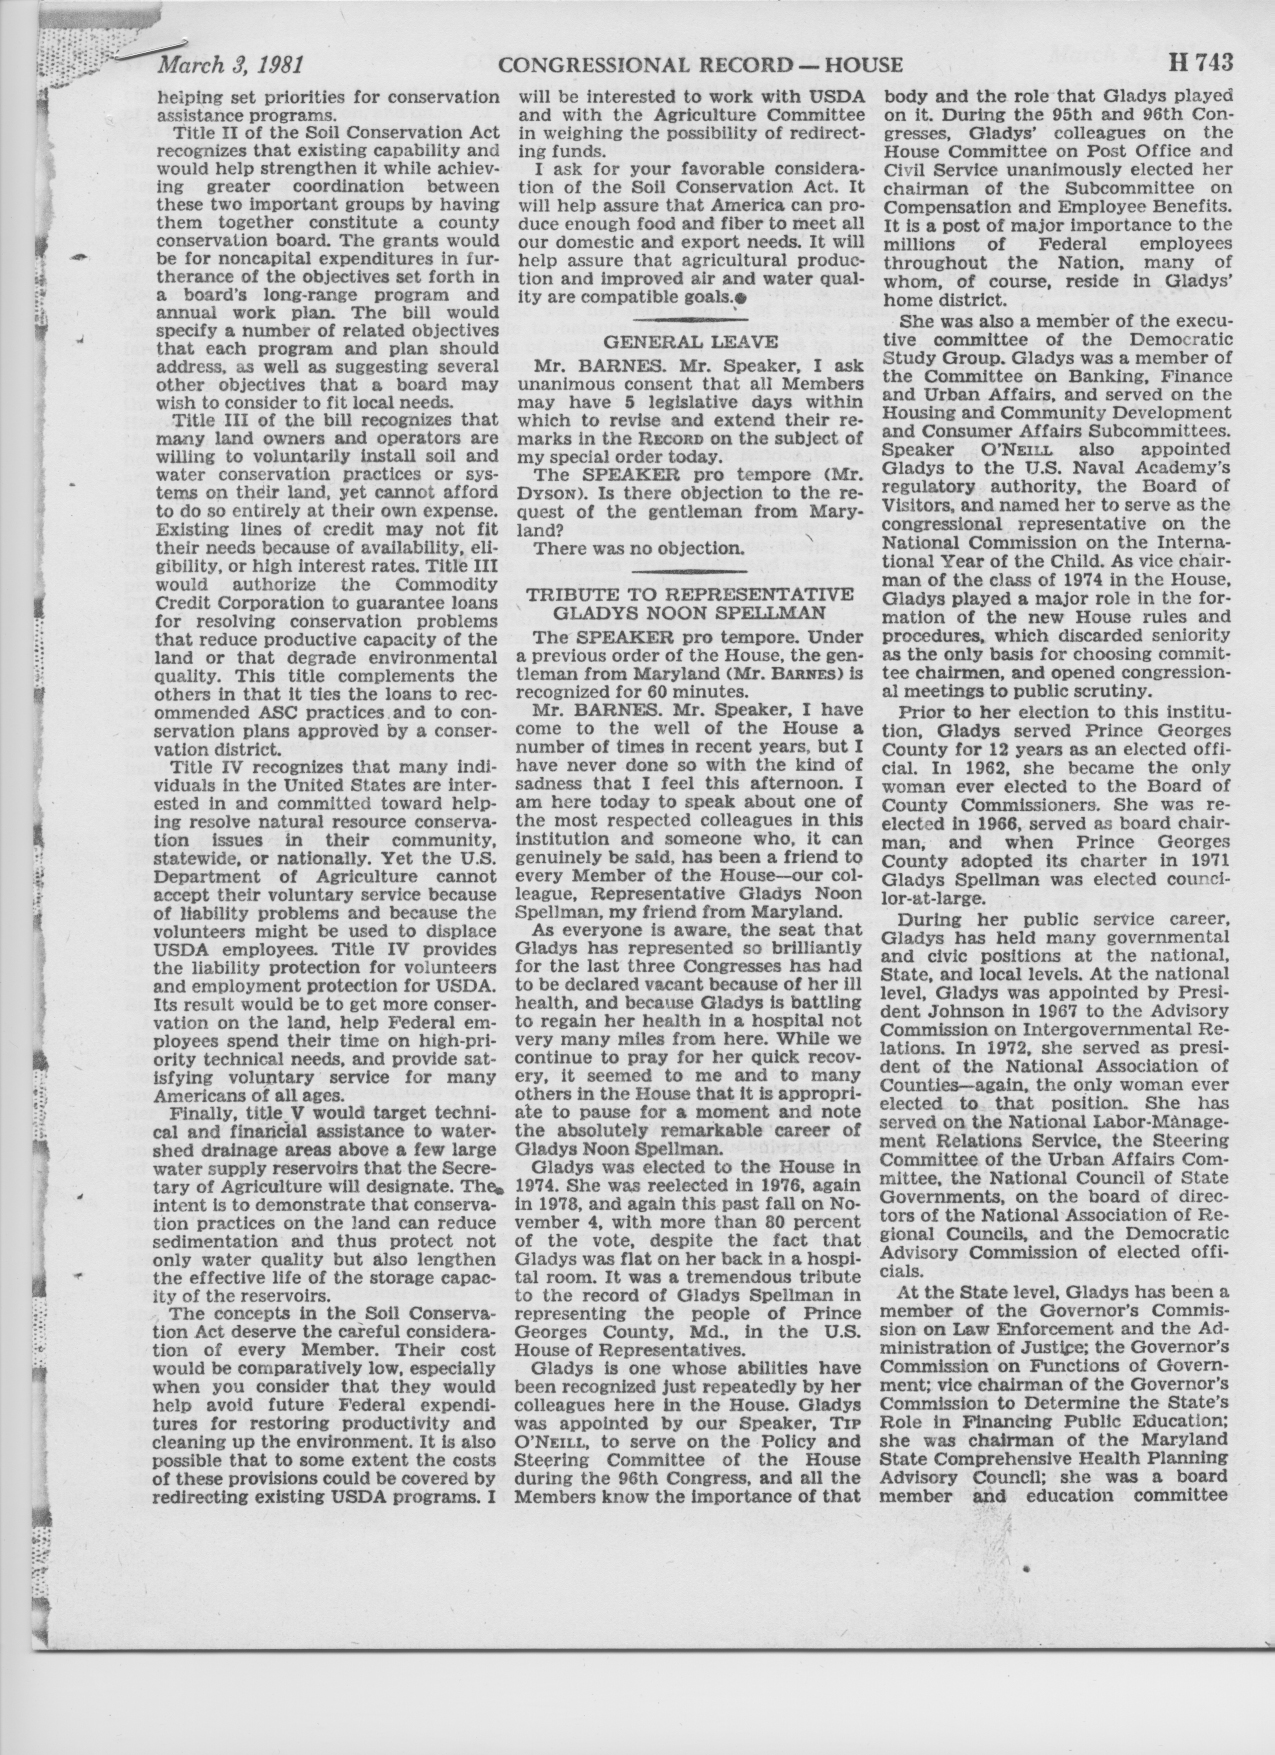 Congressional Record pages